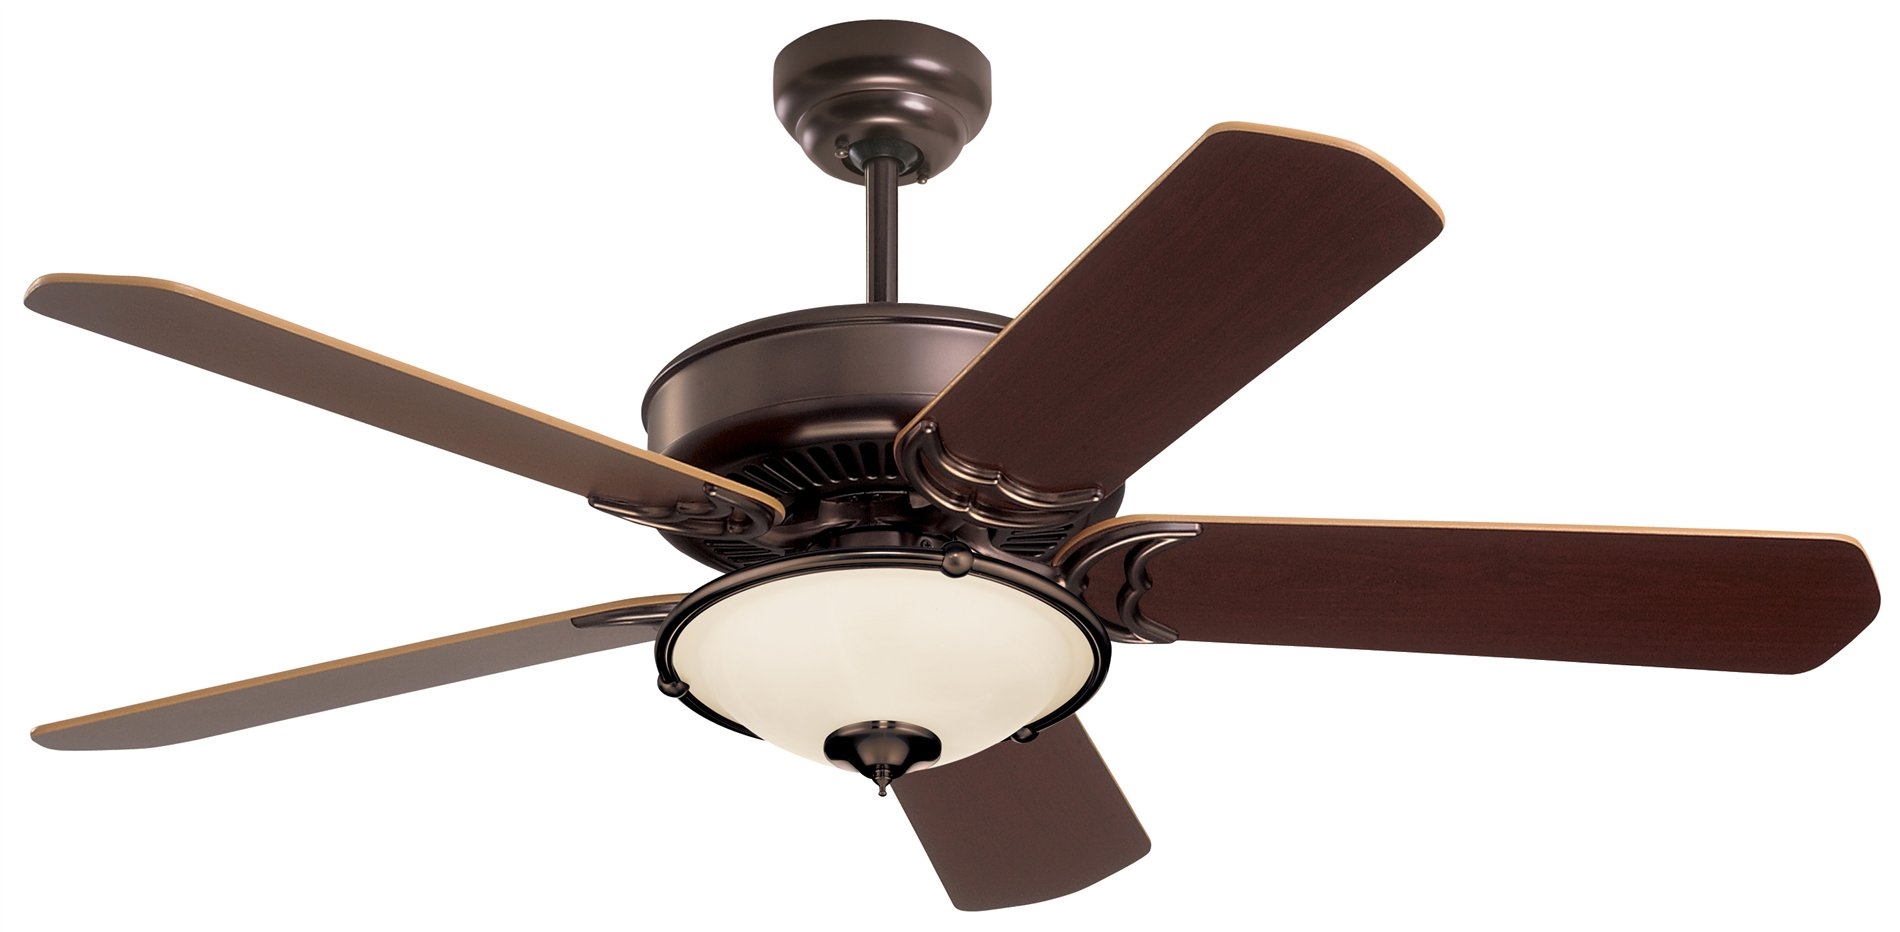 Damp Location Ceiling Fan With Light1900 X 932